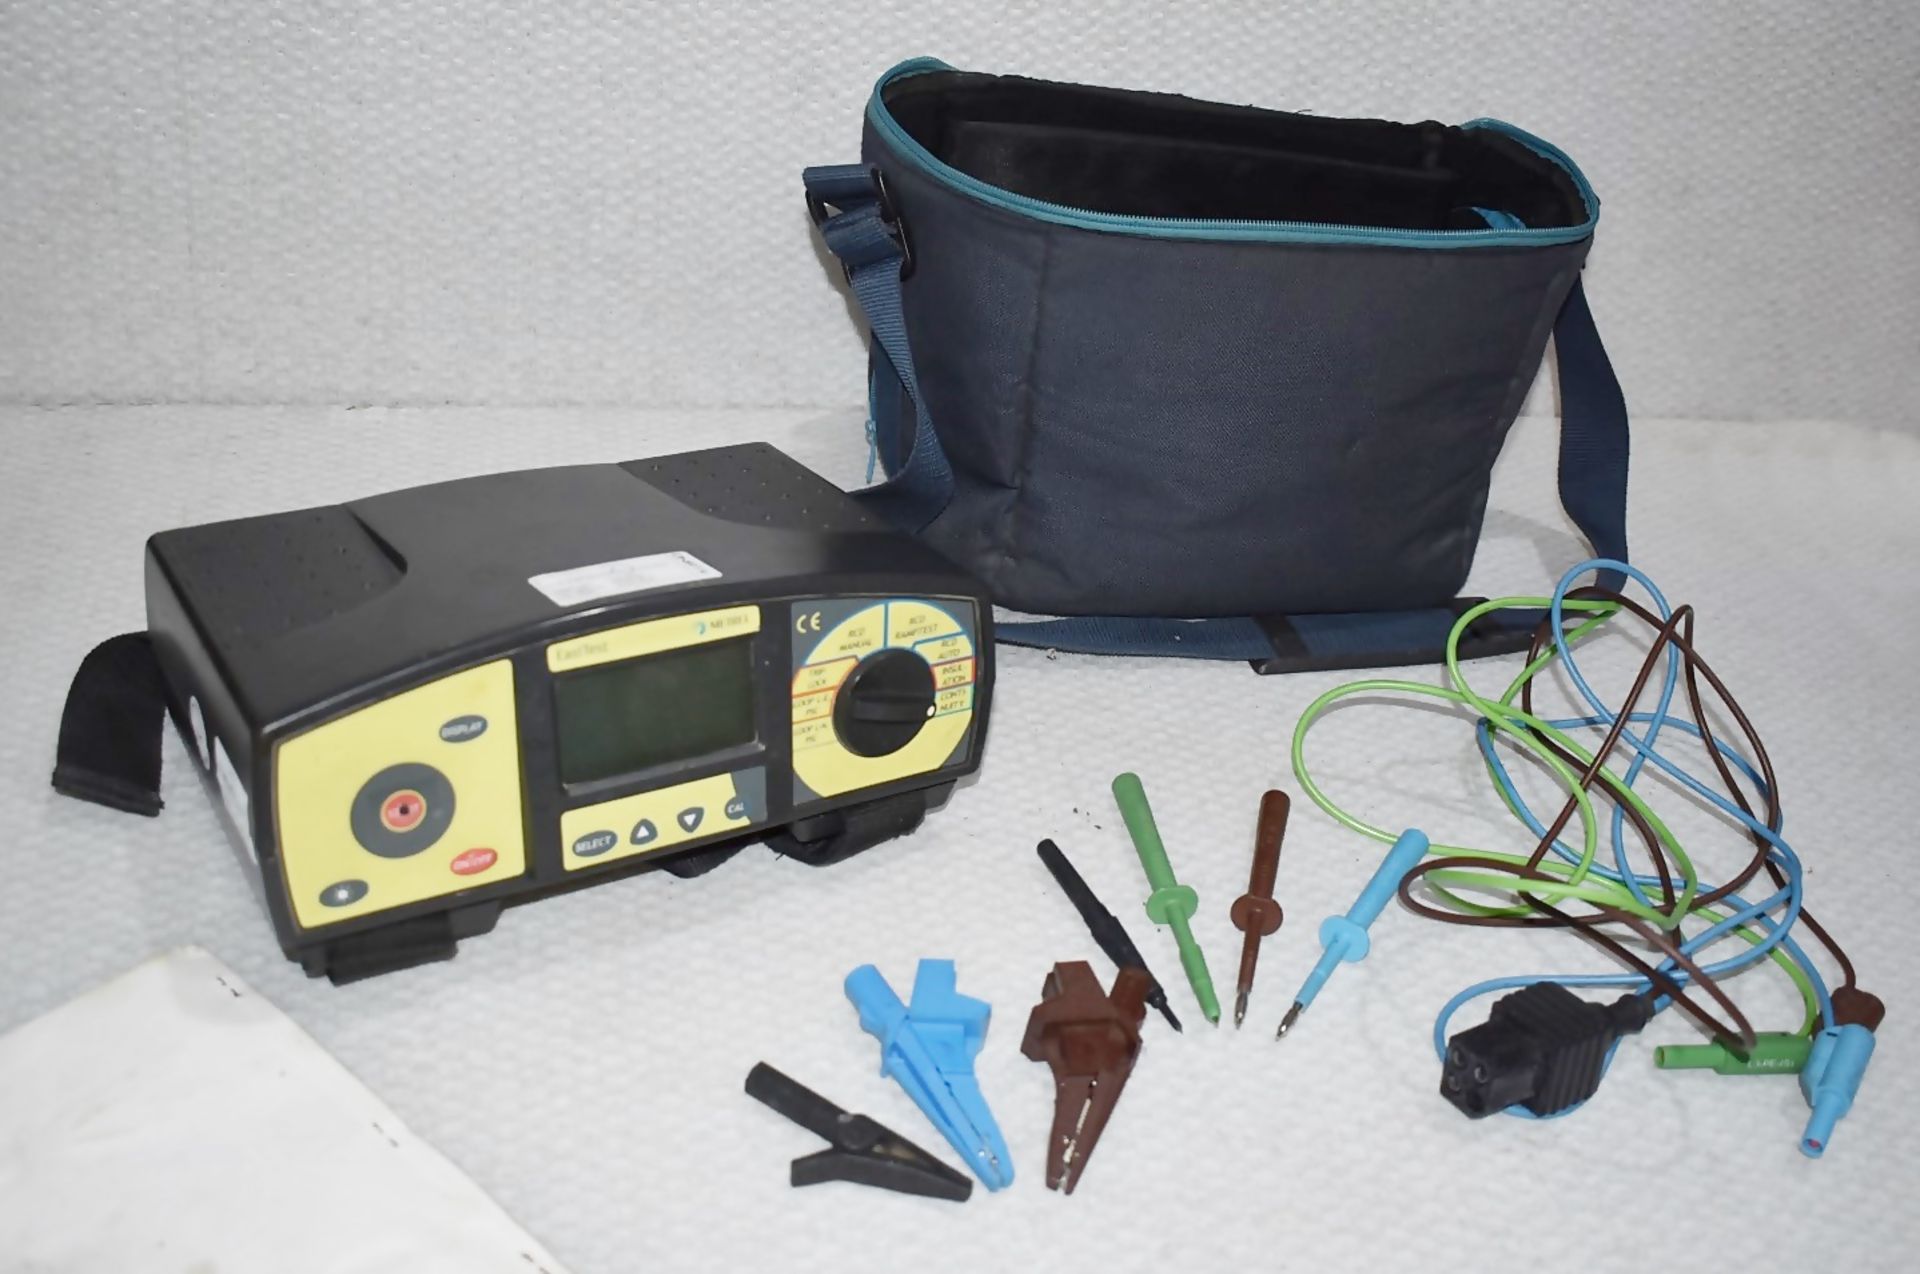 1 x METREL Easitest Multifunctional Portable Electrical Tester With Carry Case - Ref: DS7500 ALT - - Image 6 of 8